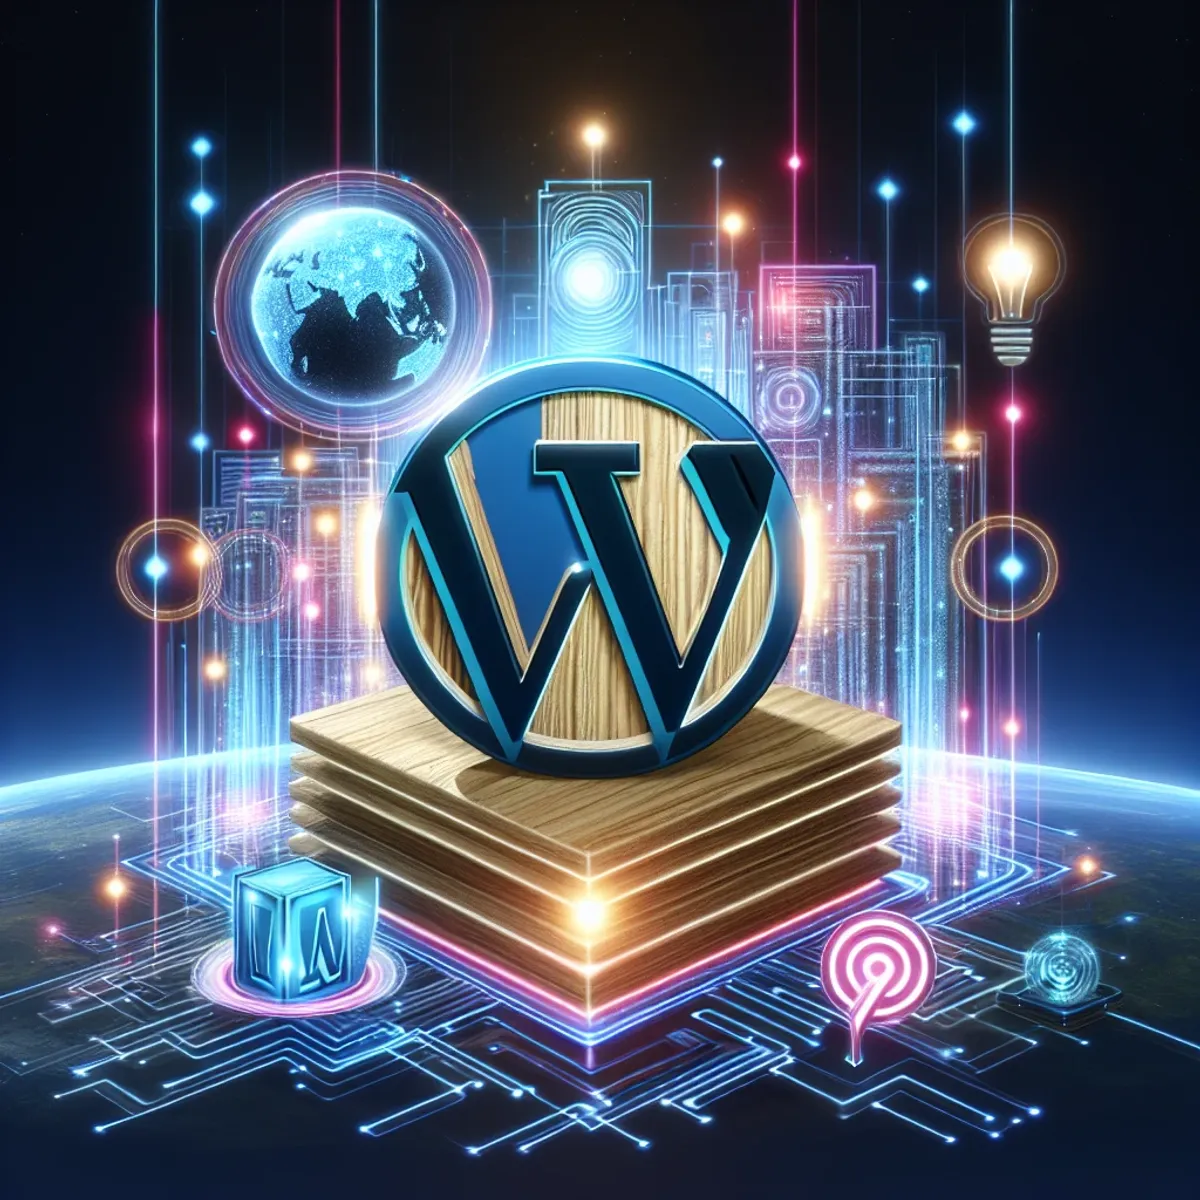 AI-powered SEO for WordPress - A glowing, neon-lined WordPress logo encircled by AI technology, with a futuristic cityscape below and abstract web traffic symbols to the side.